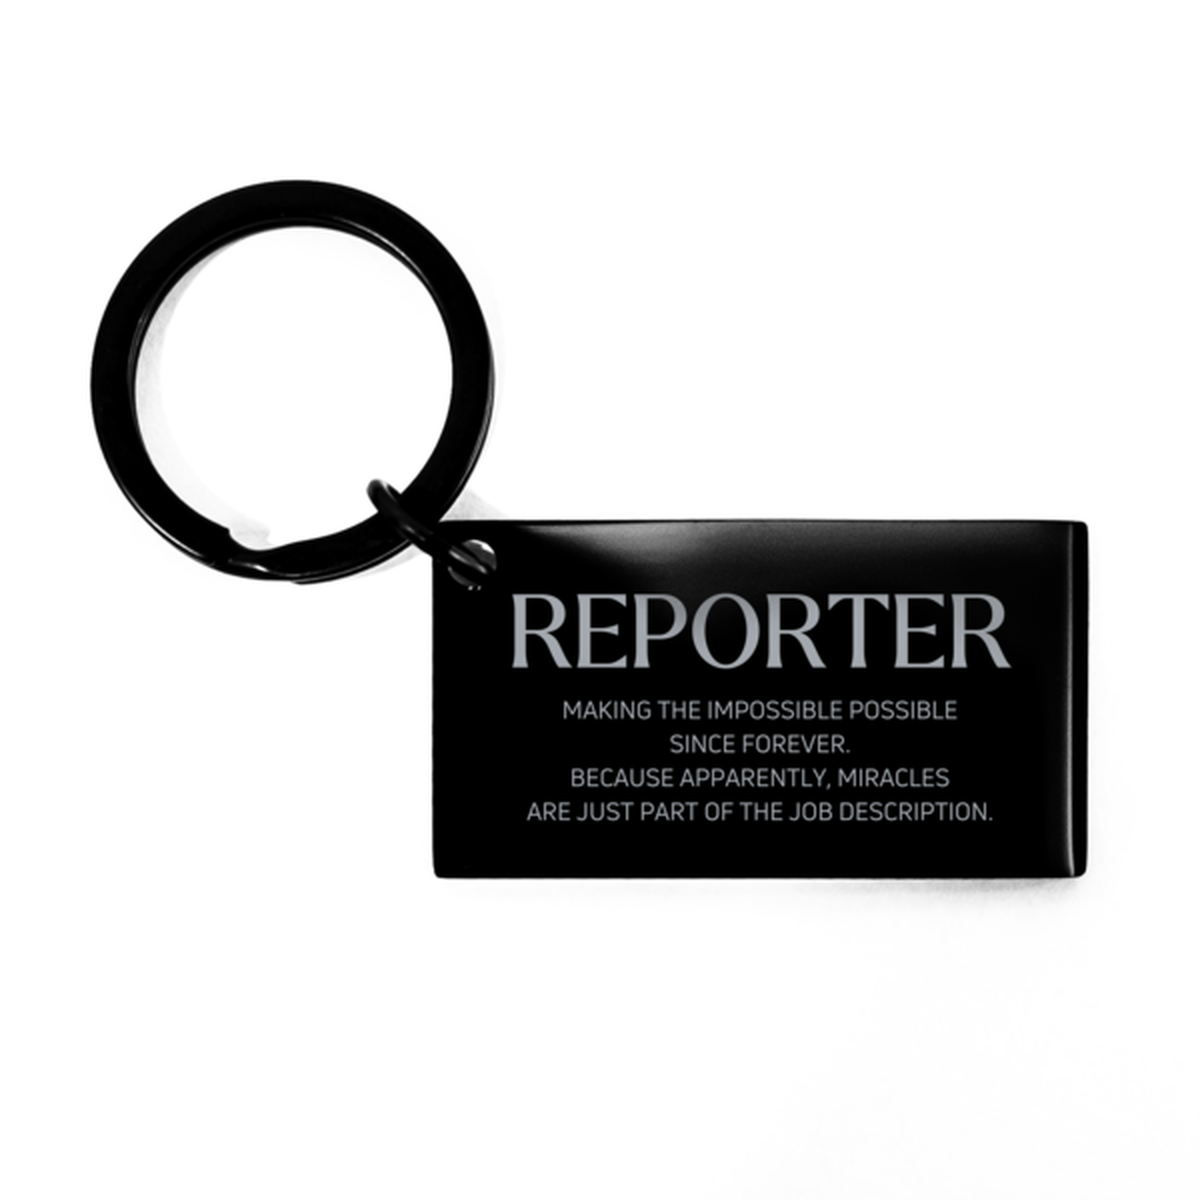 Funny Reporter Gifts, Miracles are just part of the job description, Inspirational Birthday Keychain For Reporter, Men, Women, Coworkers, Friends, Boss